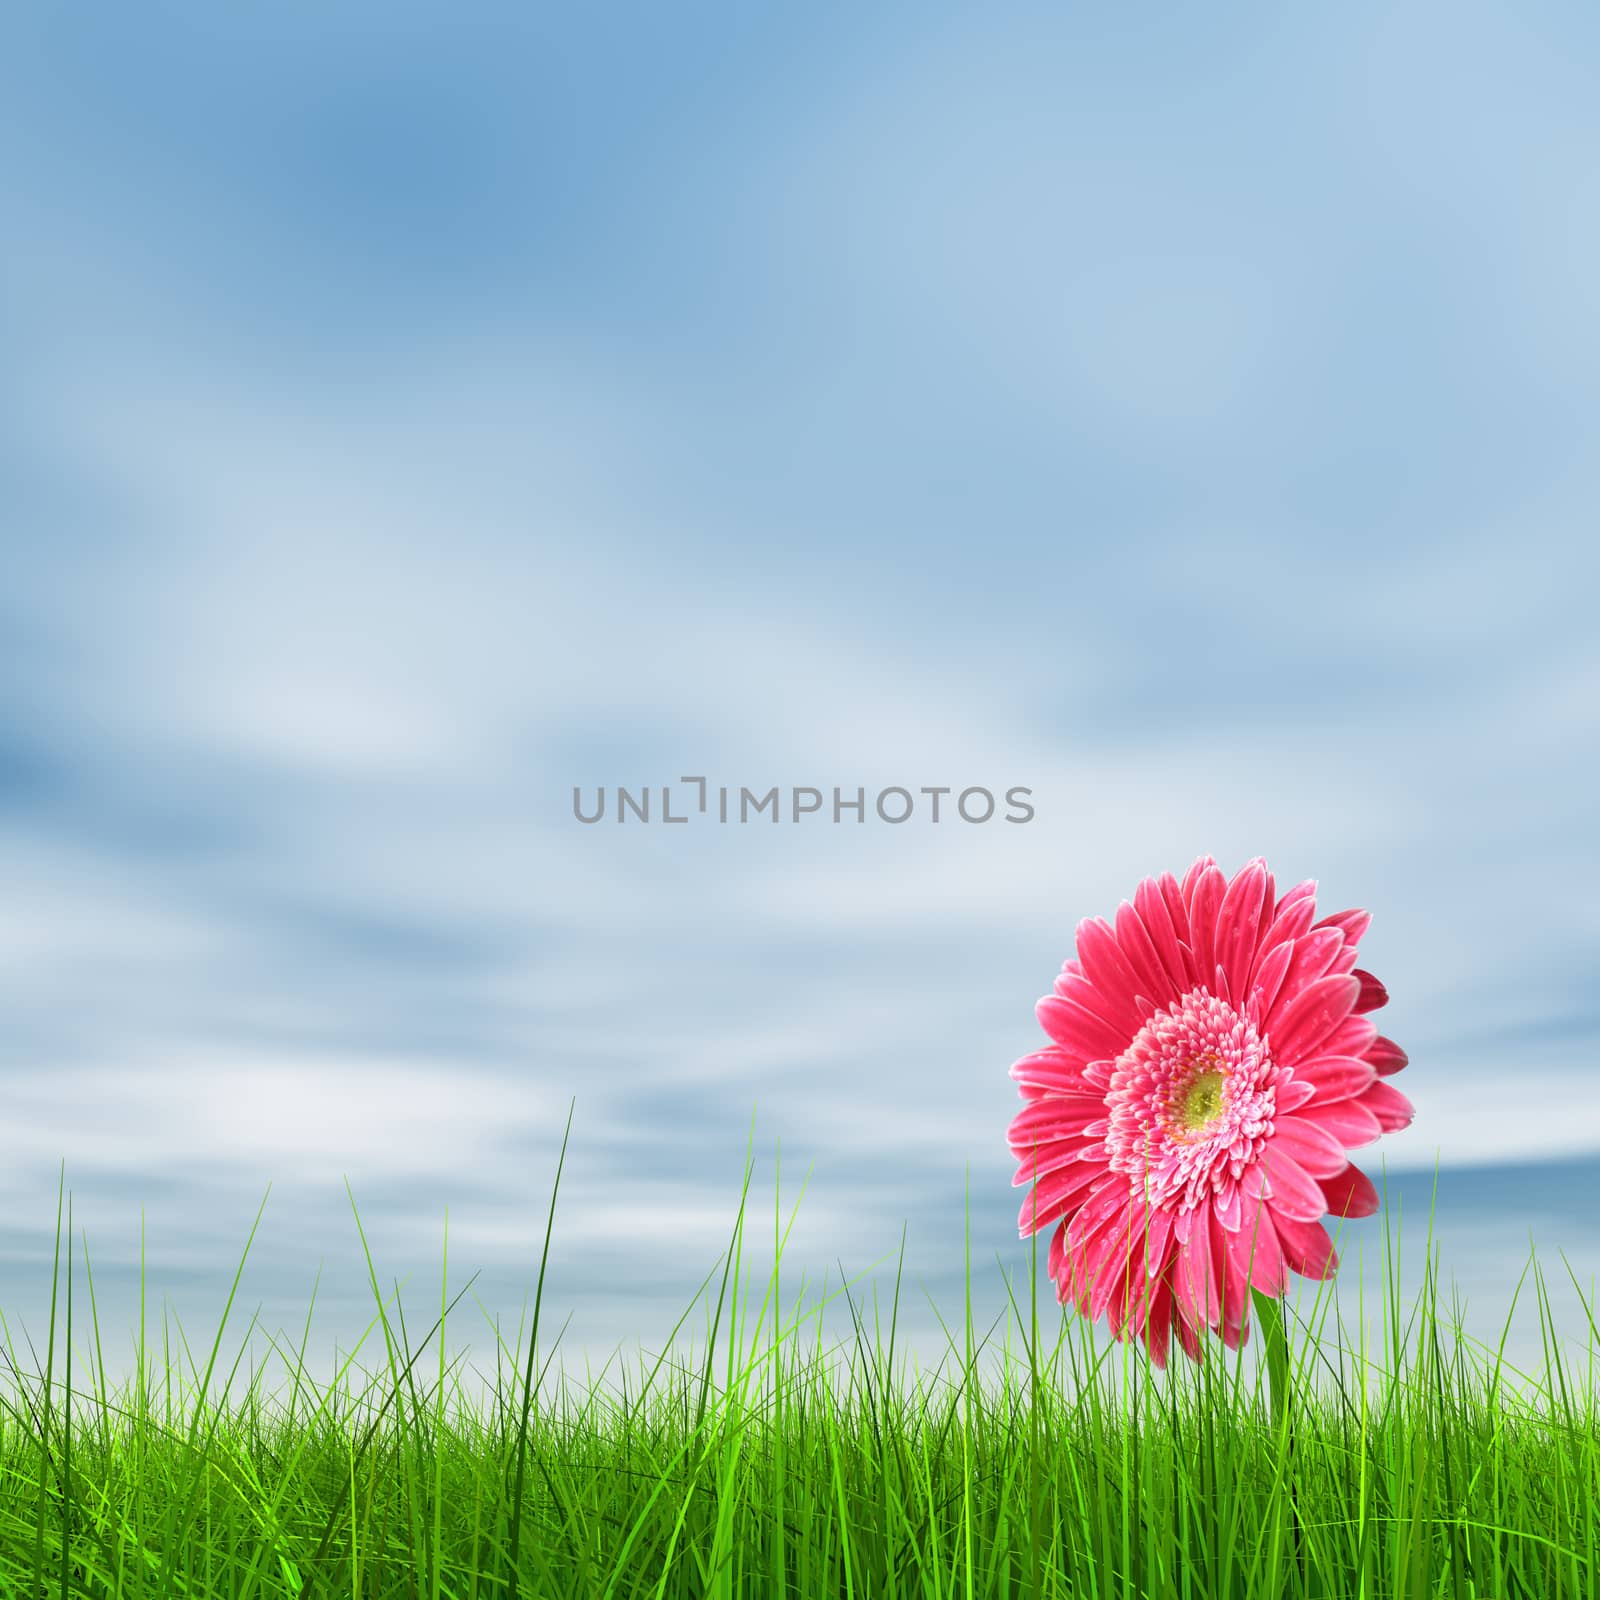 Conceptual spring pink flower in green grass background